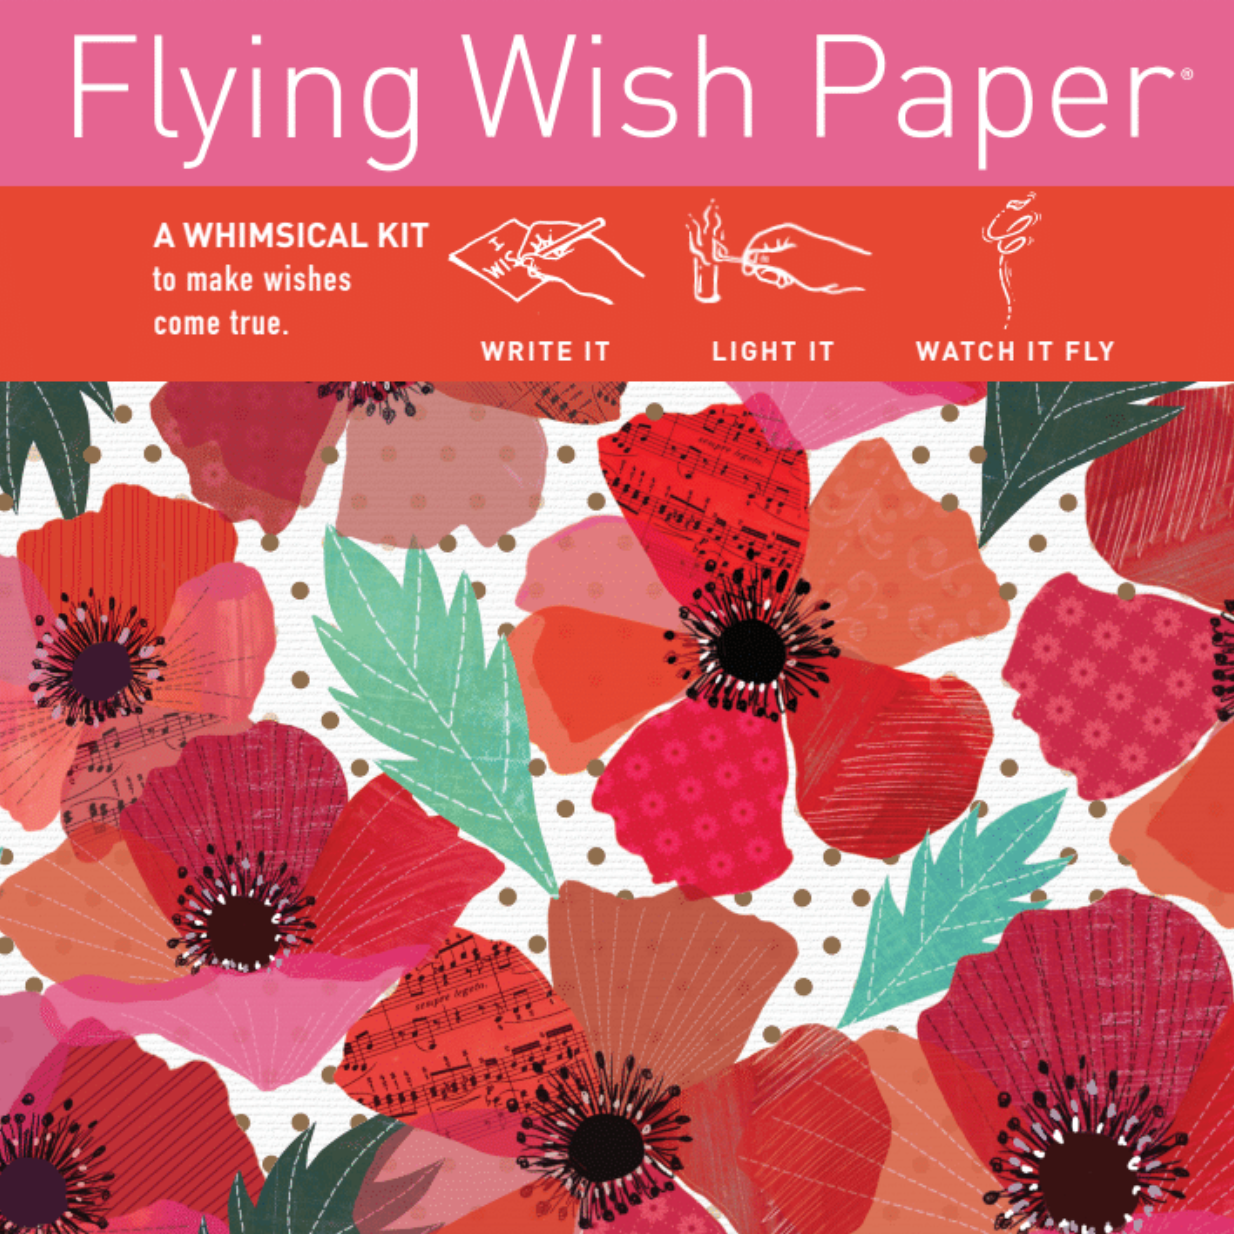 Flying Wishing Paper - What is it and how do I use it?